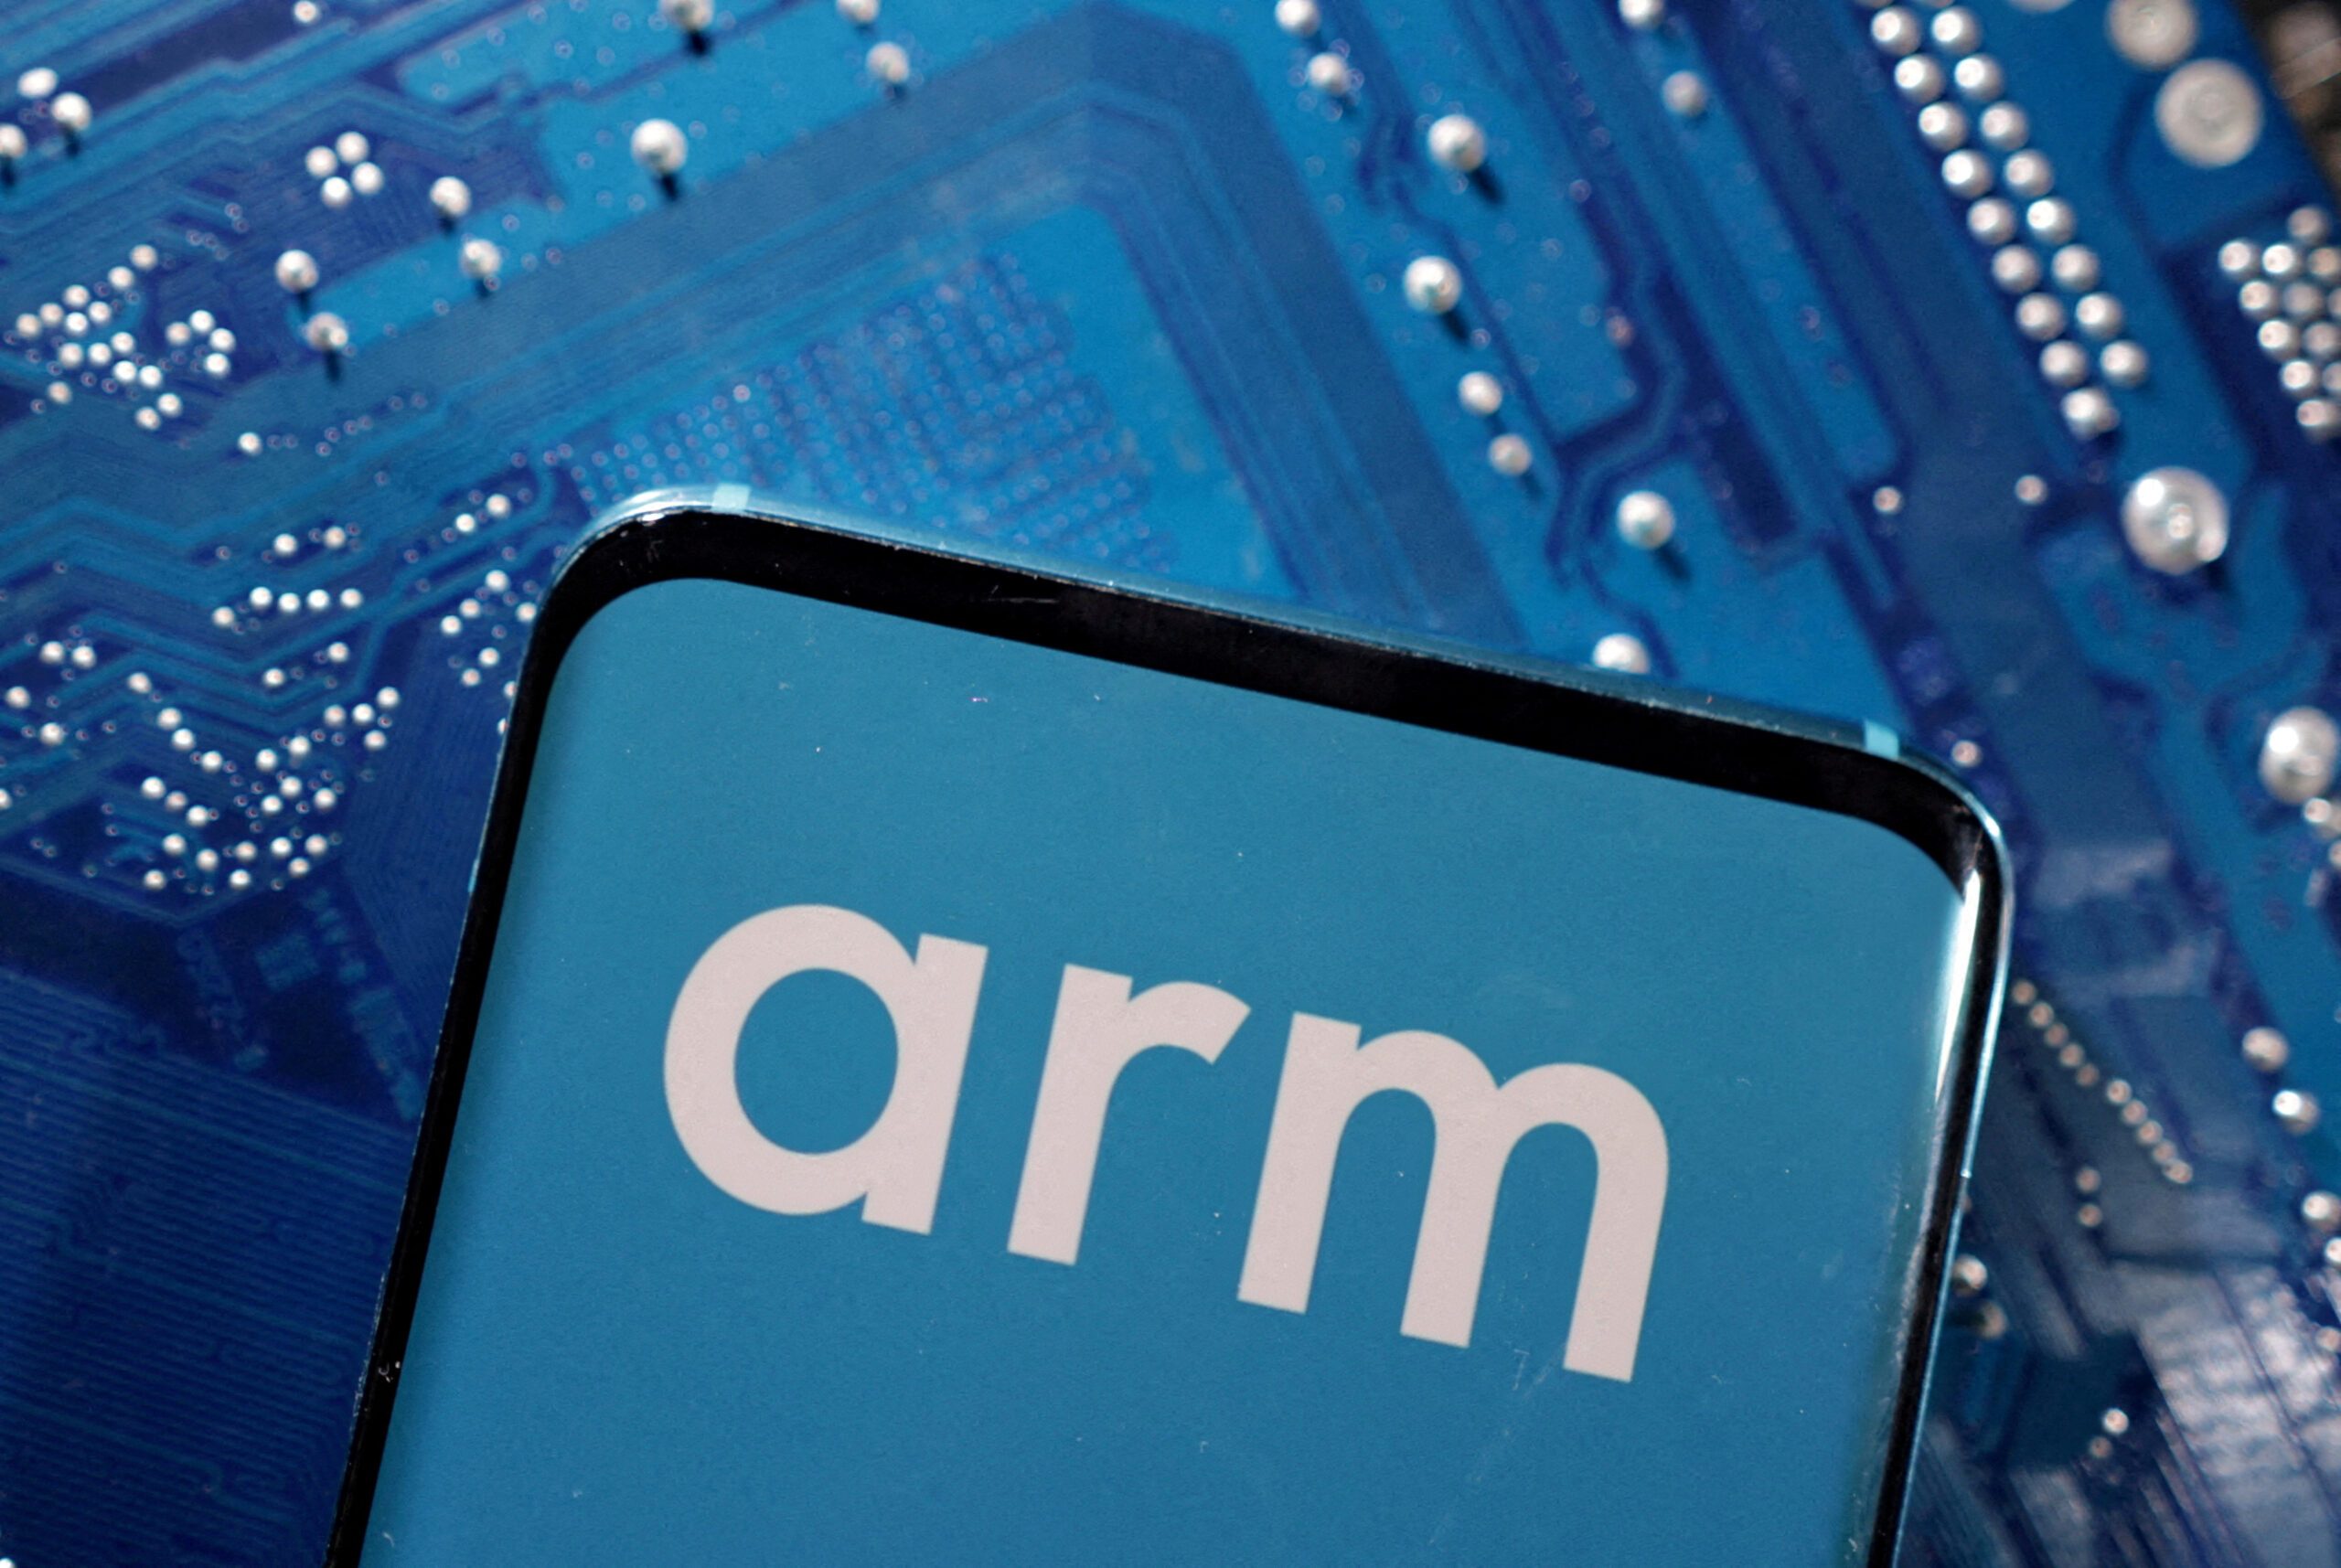 Arm says cloud computing expansion, royalty revenue to be major growth drivers